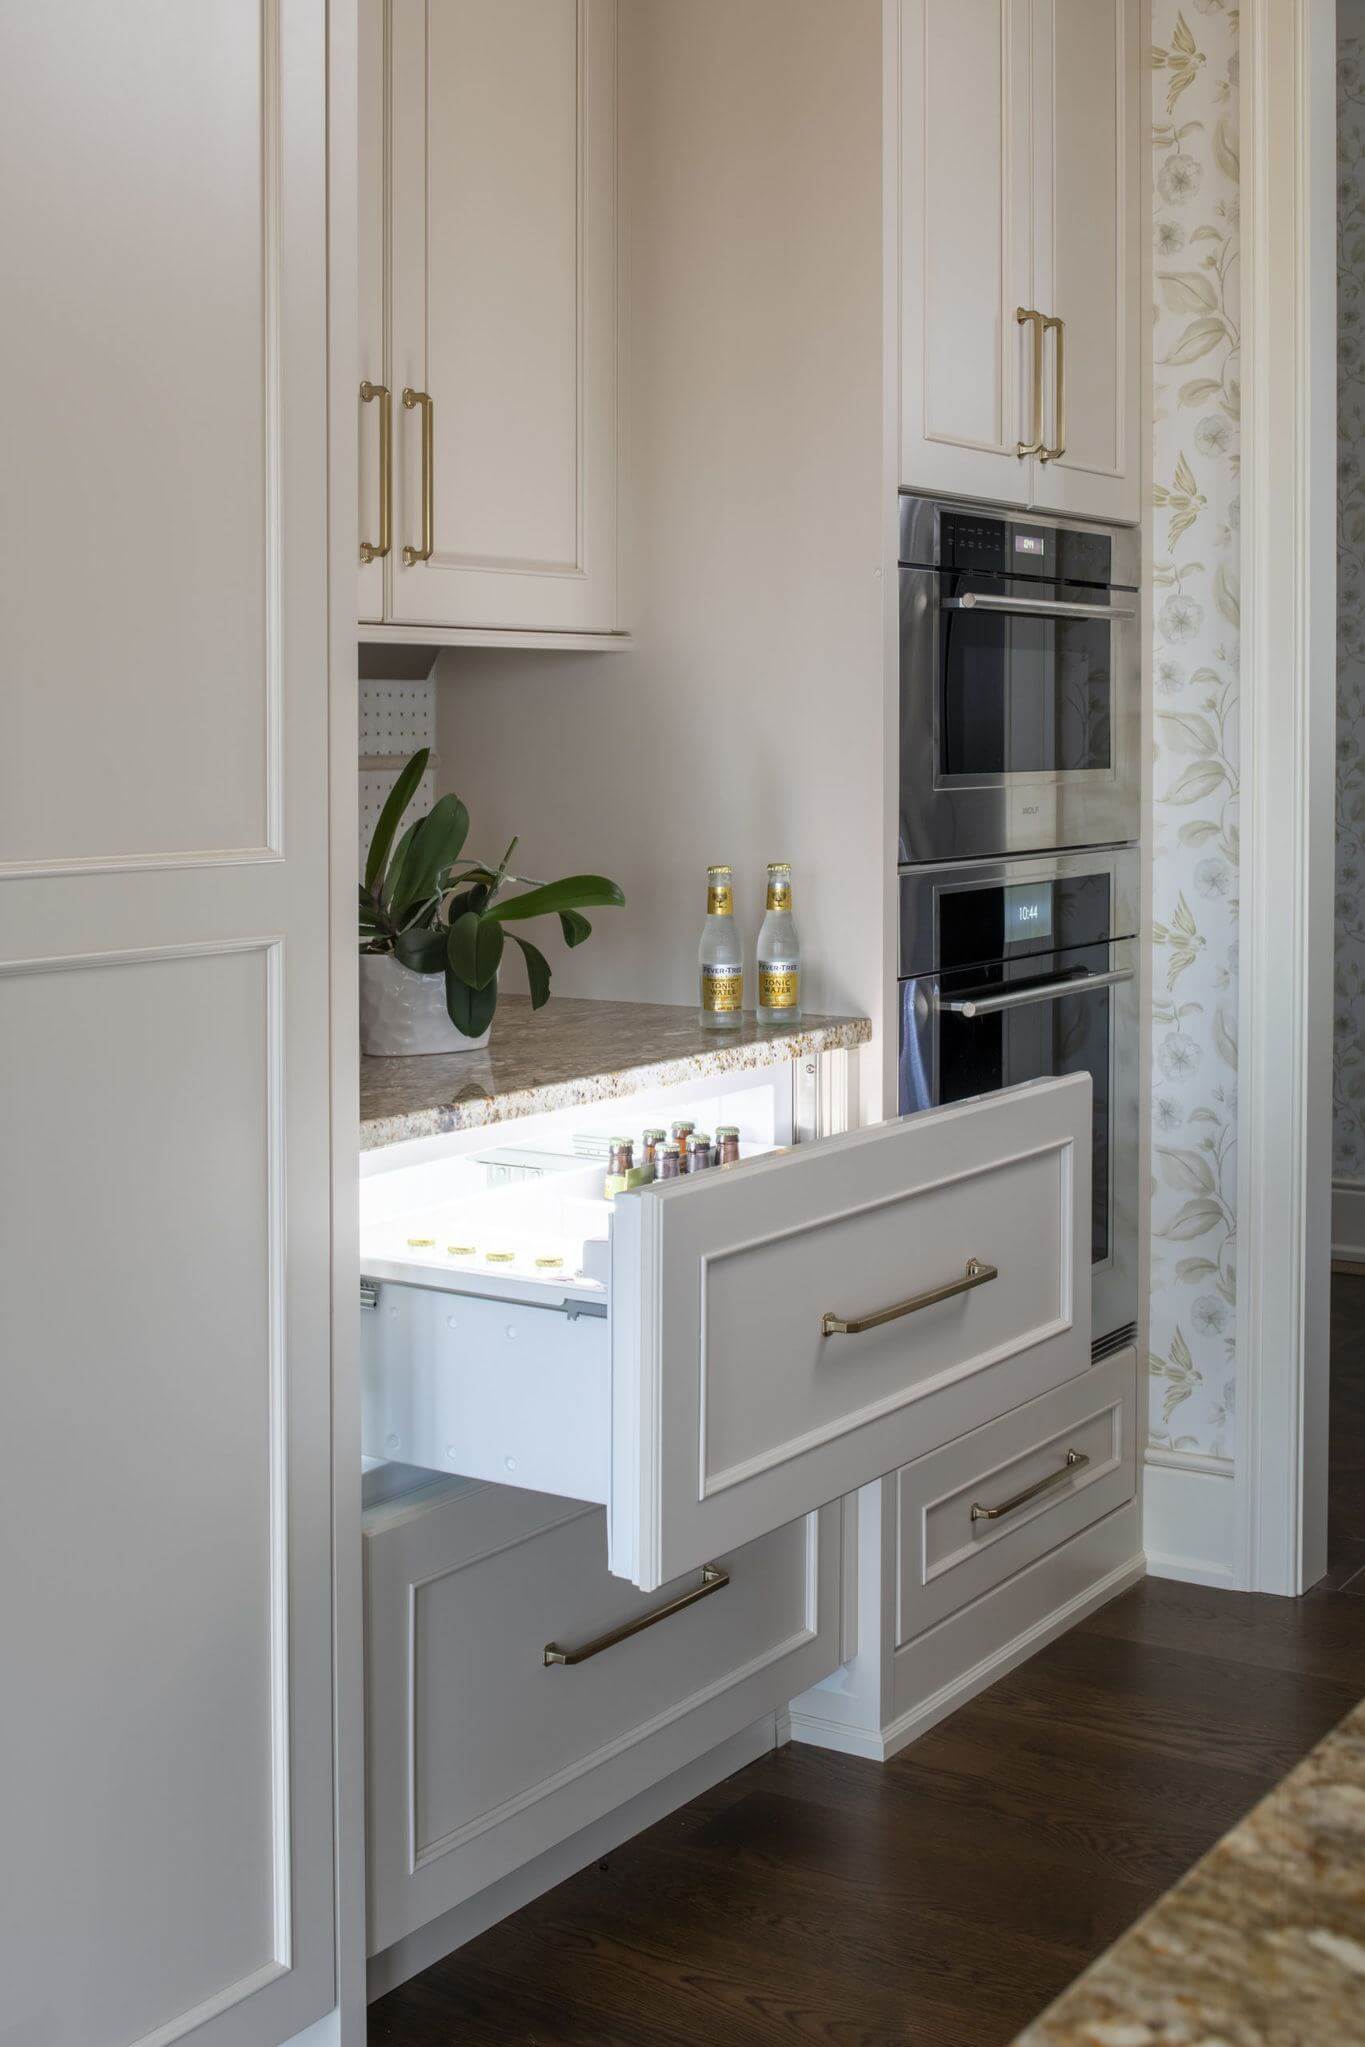 White painted cabinets with an appliance paneled beverage drawer.